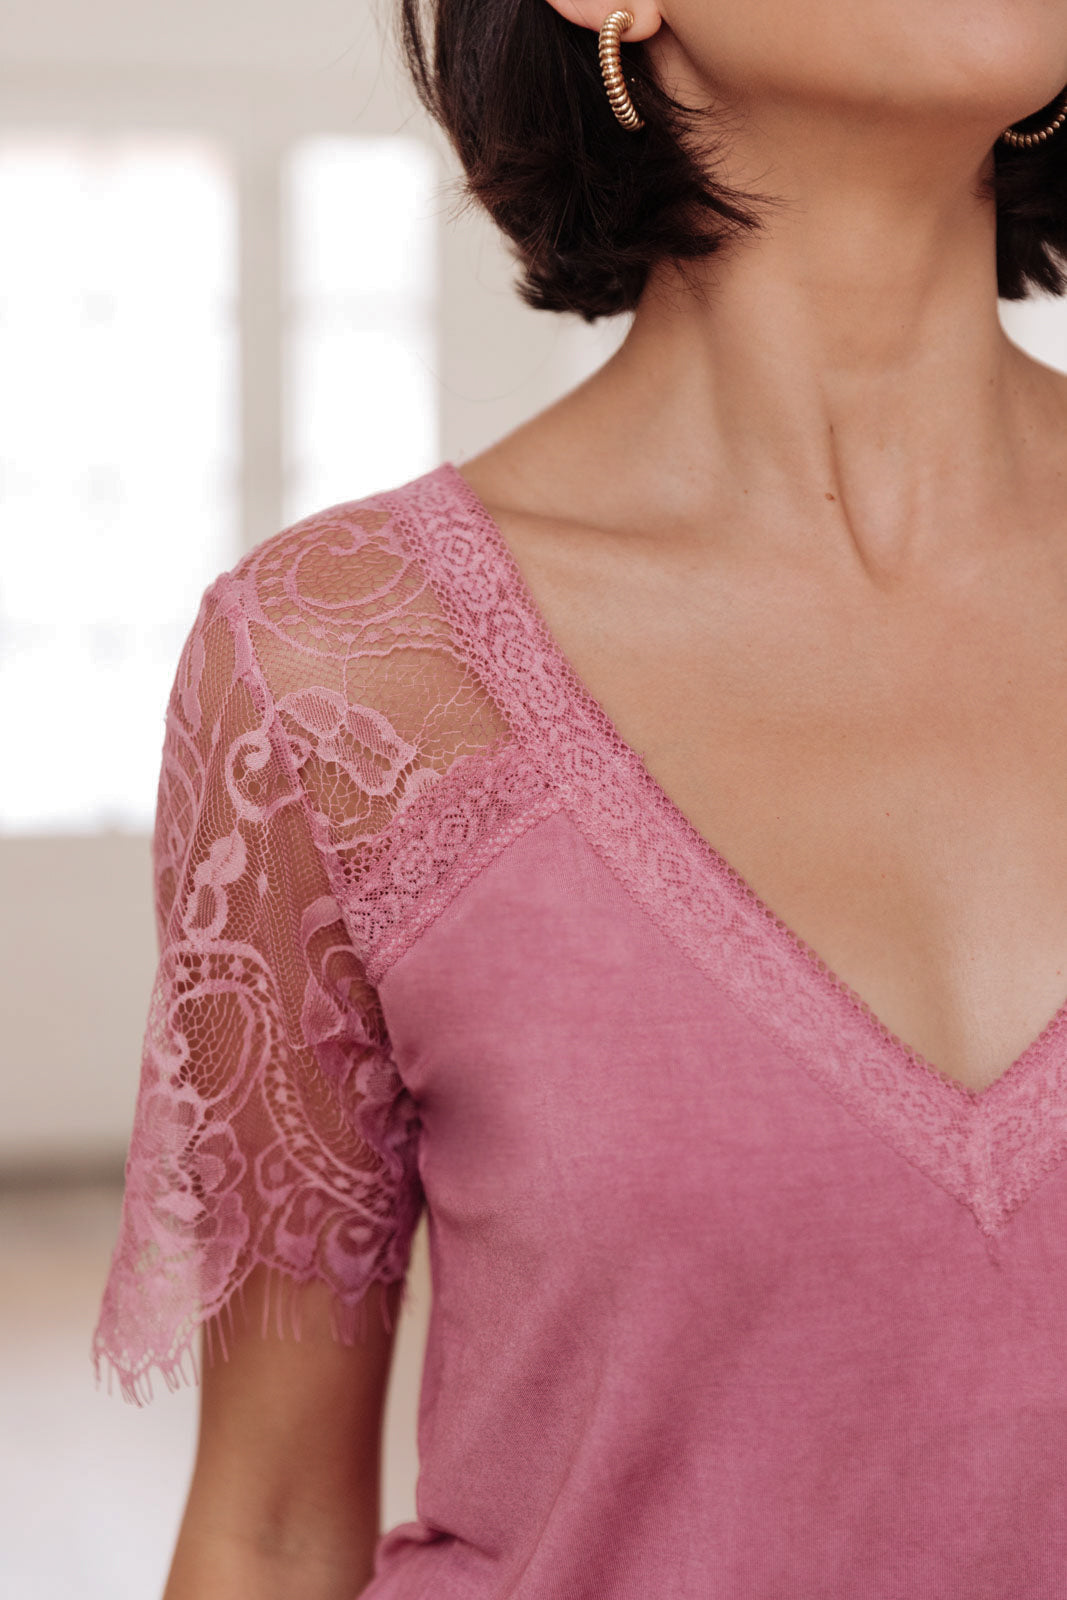 A Little Bit of Lace Top In Pink (Online Exclusive)